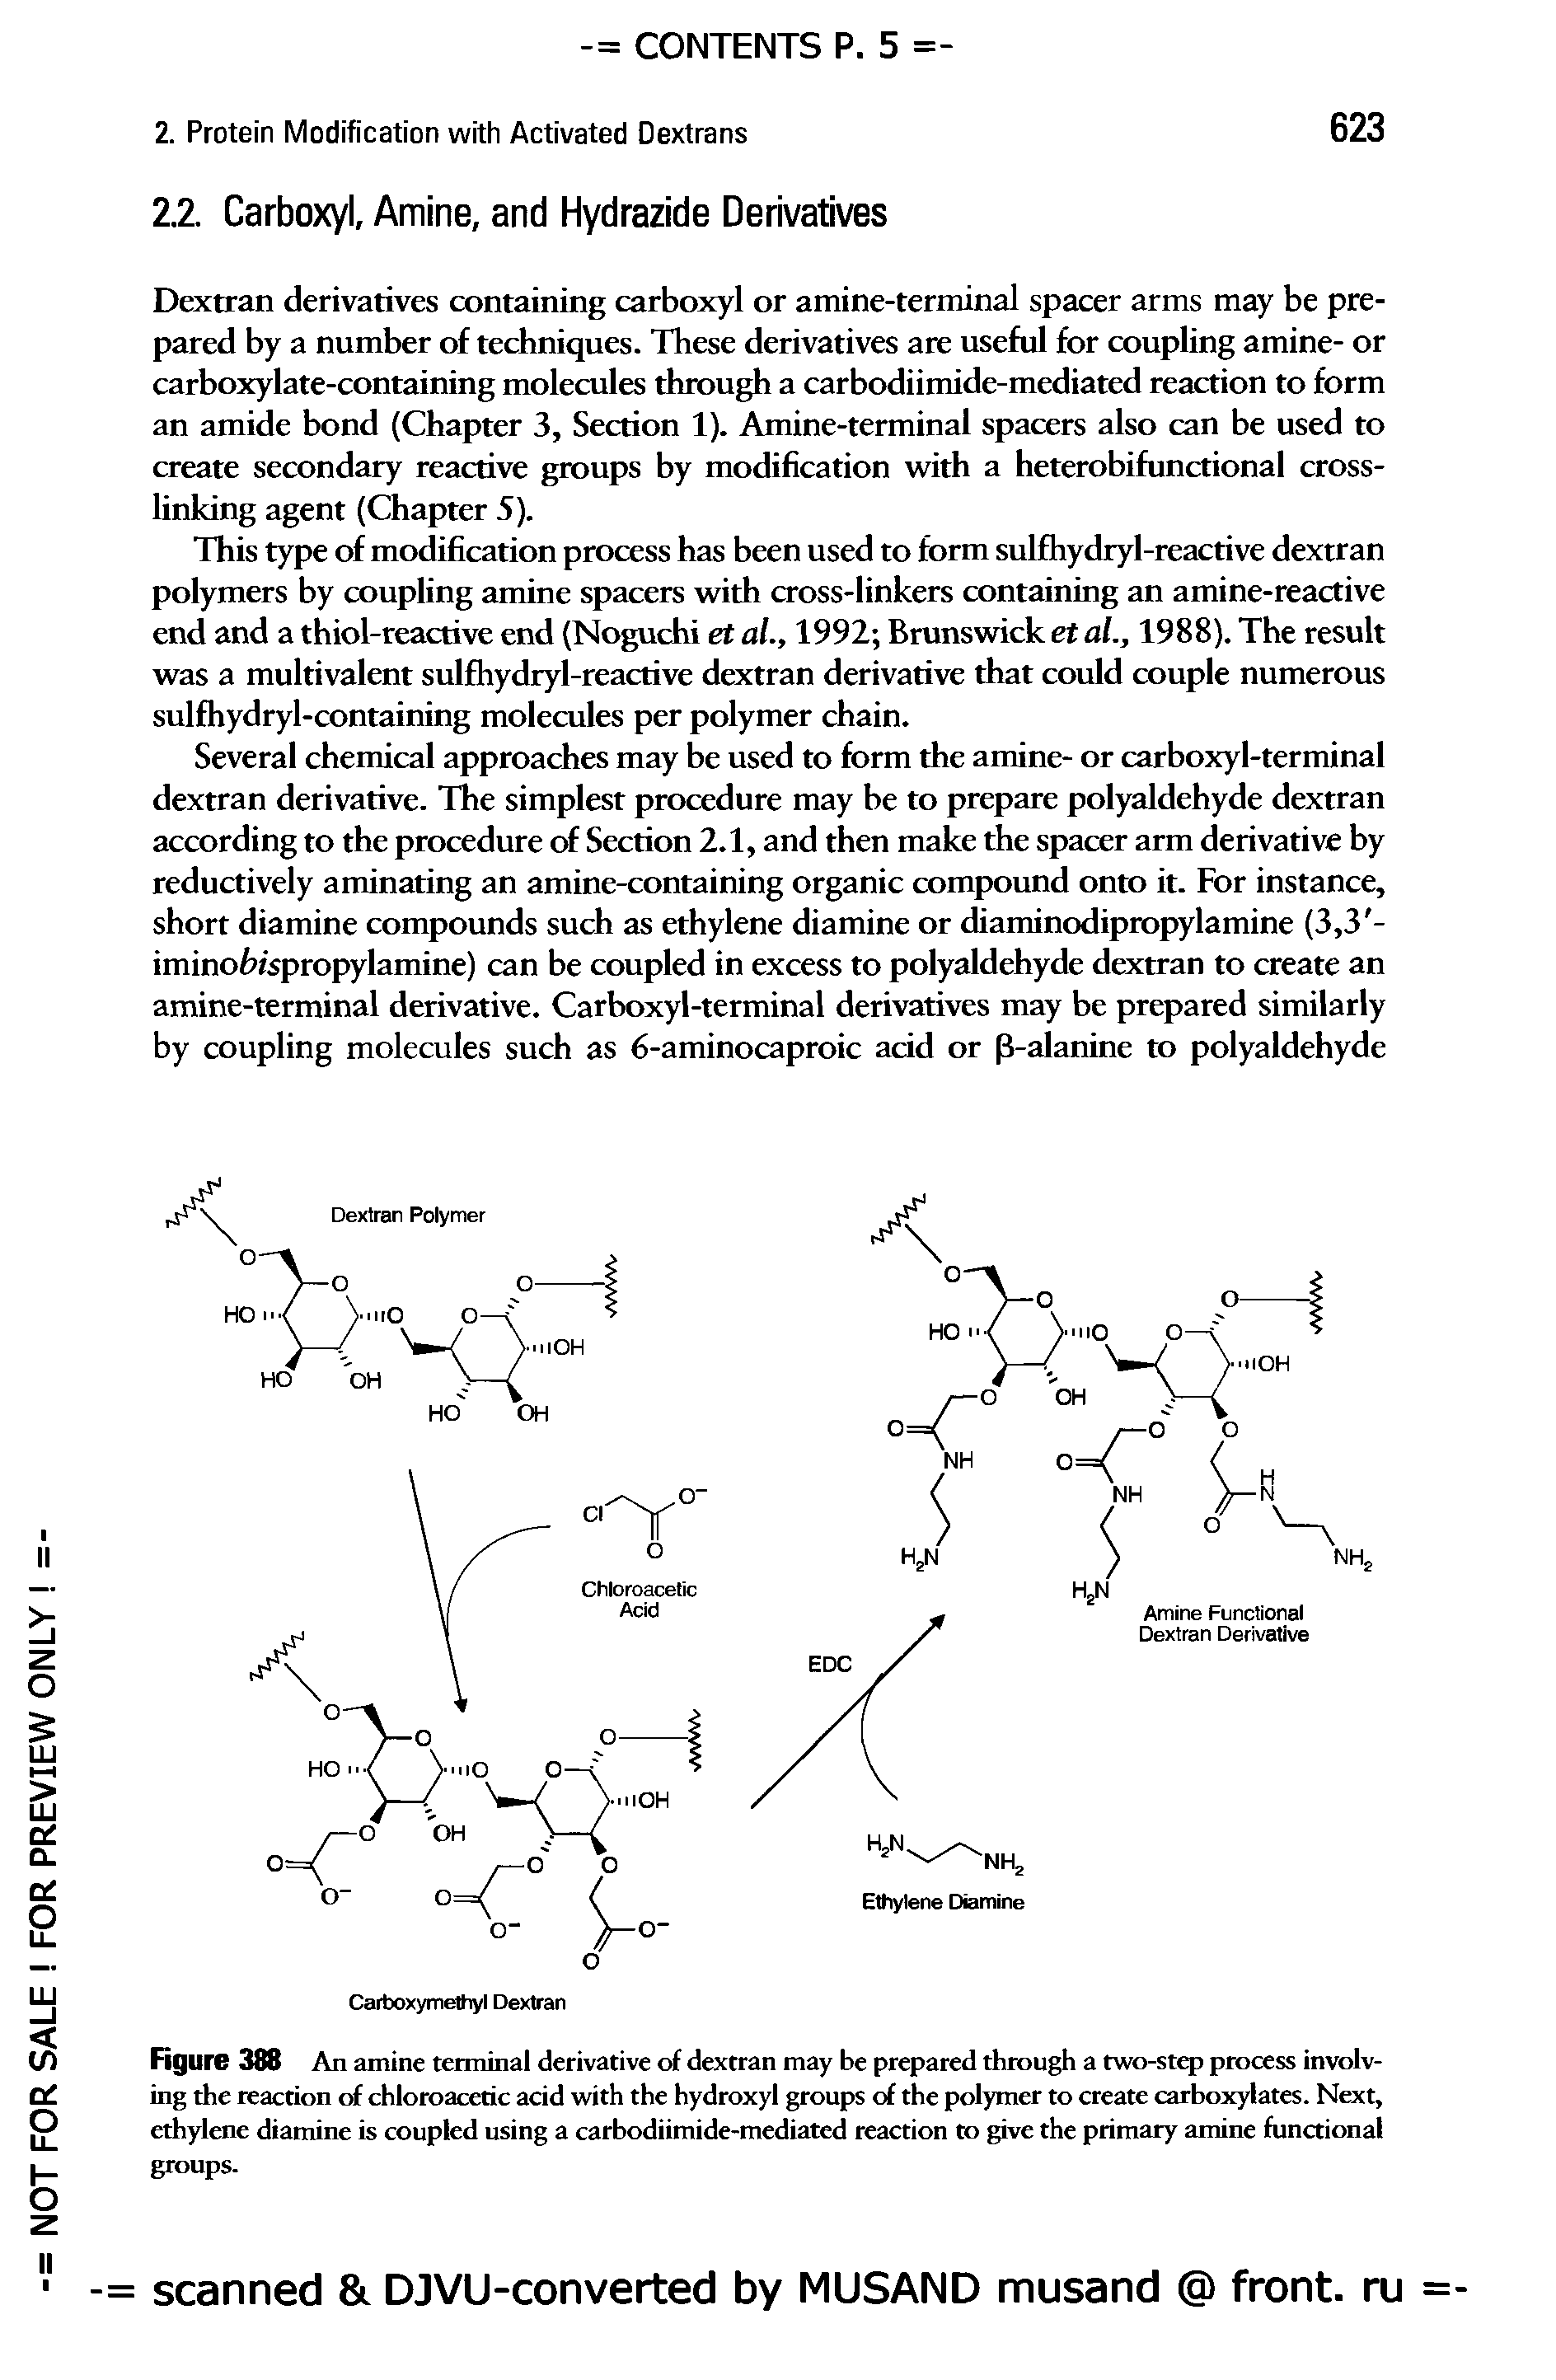 Figure 388 An amine terminal derivative of dextran may be prepared through a two-step process involving the reaction of chloroacetic acid with the hydroxyl groups of the polymer to create carboxylates. Next, ethylene diamine is coupled using a carbodiimide-mediated reaction to give the primary amine functional groups.